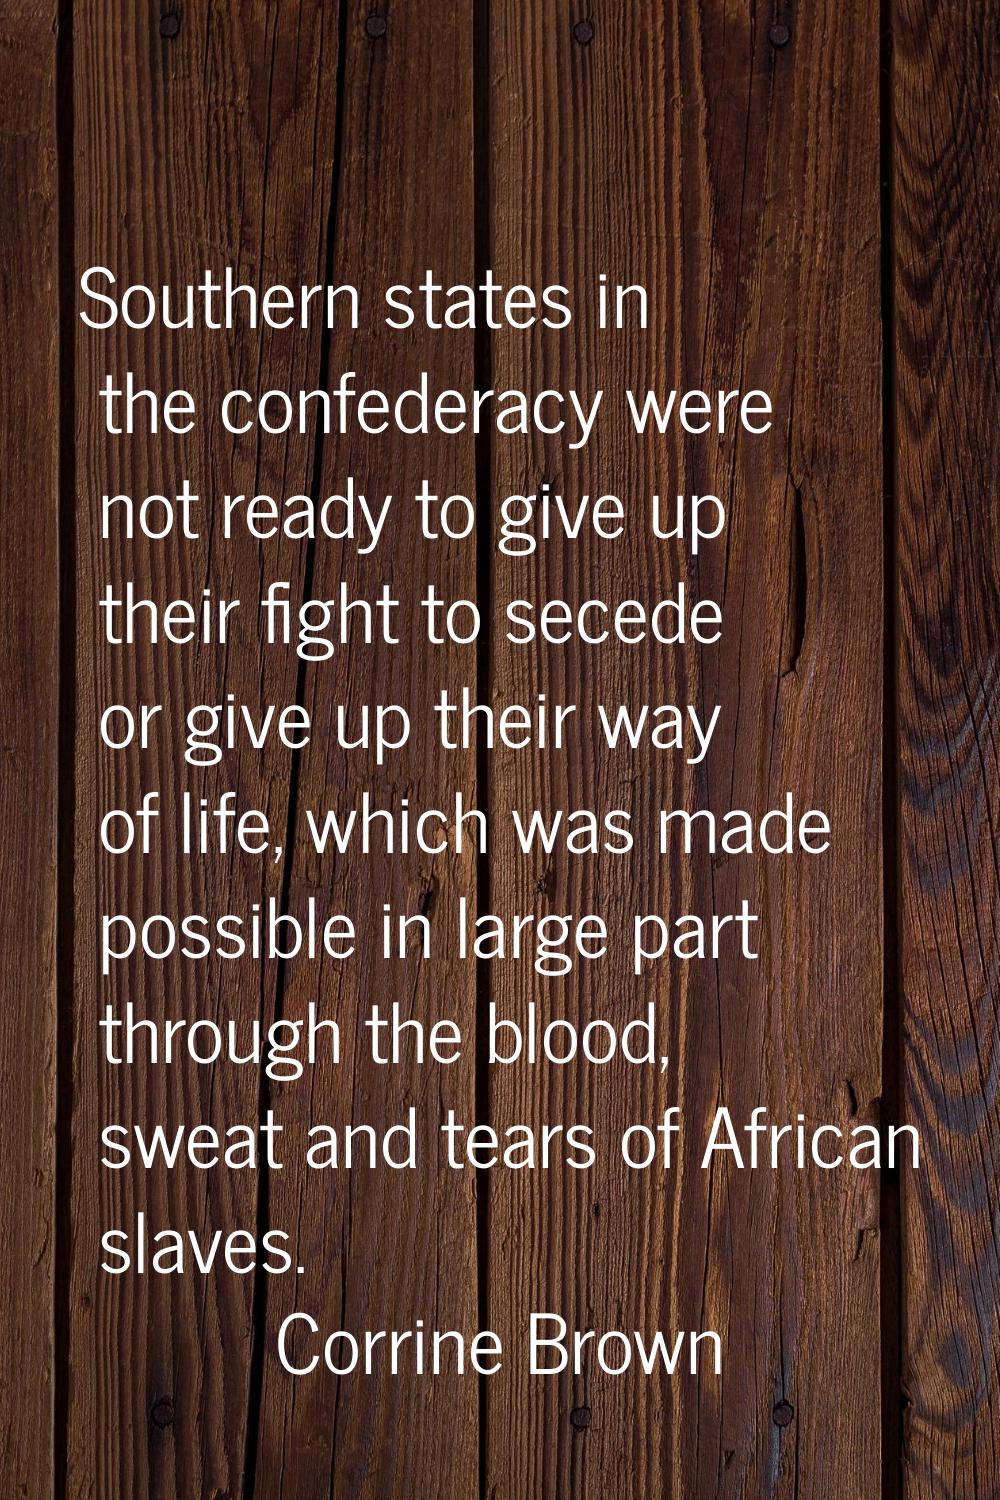 Southern states in the confederacy were not ready to give up their fight to secede or give up their